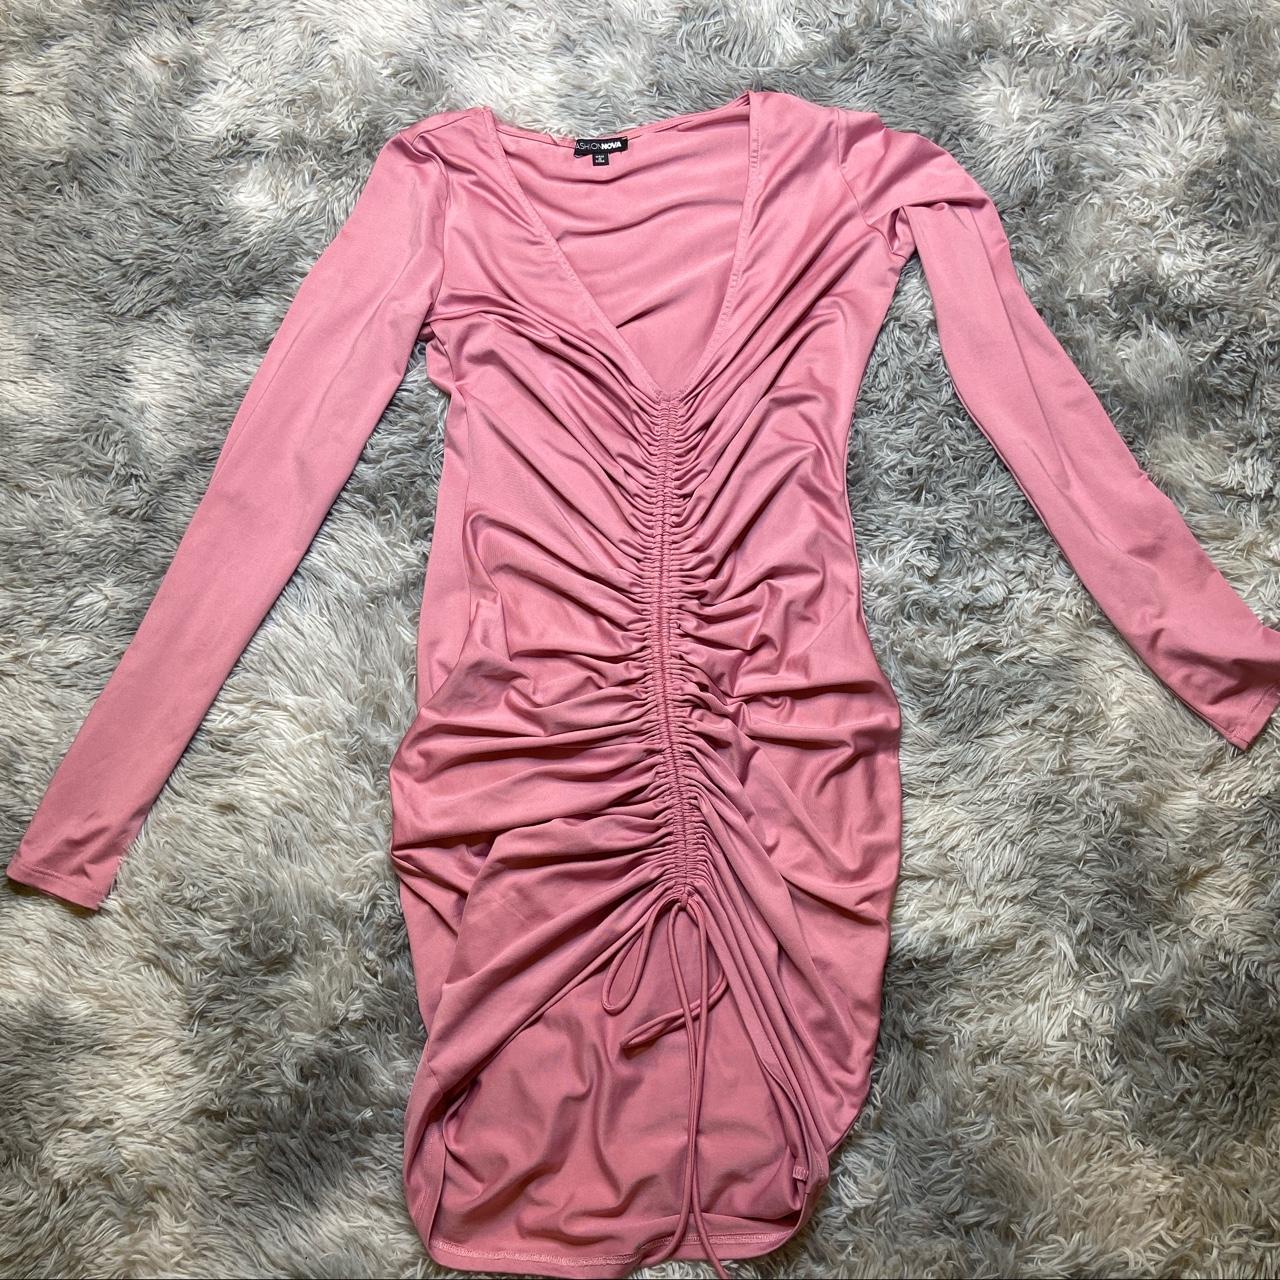 By The Way. Revolve sexy Hot Pink Front tie strappy - Depop